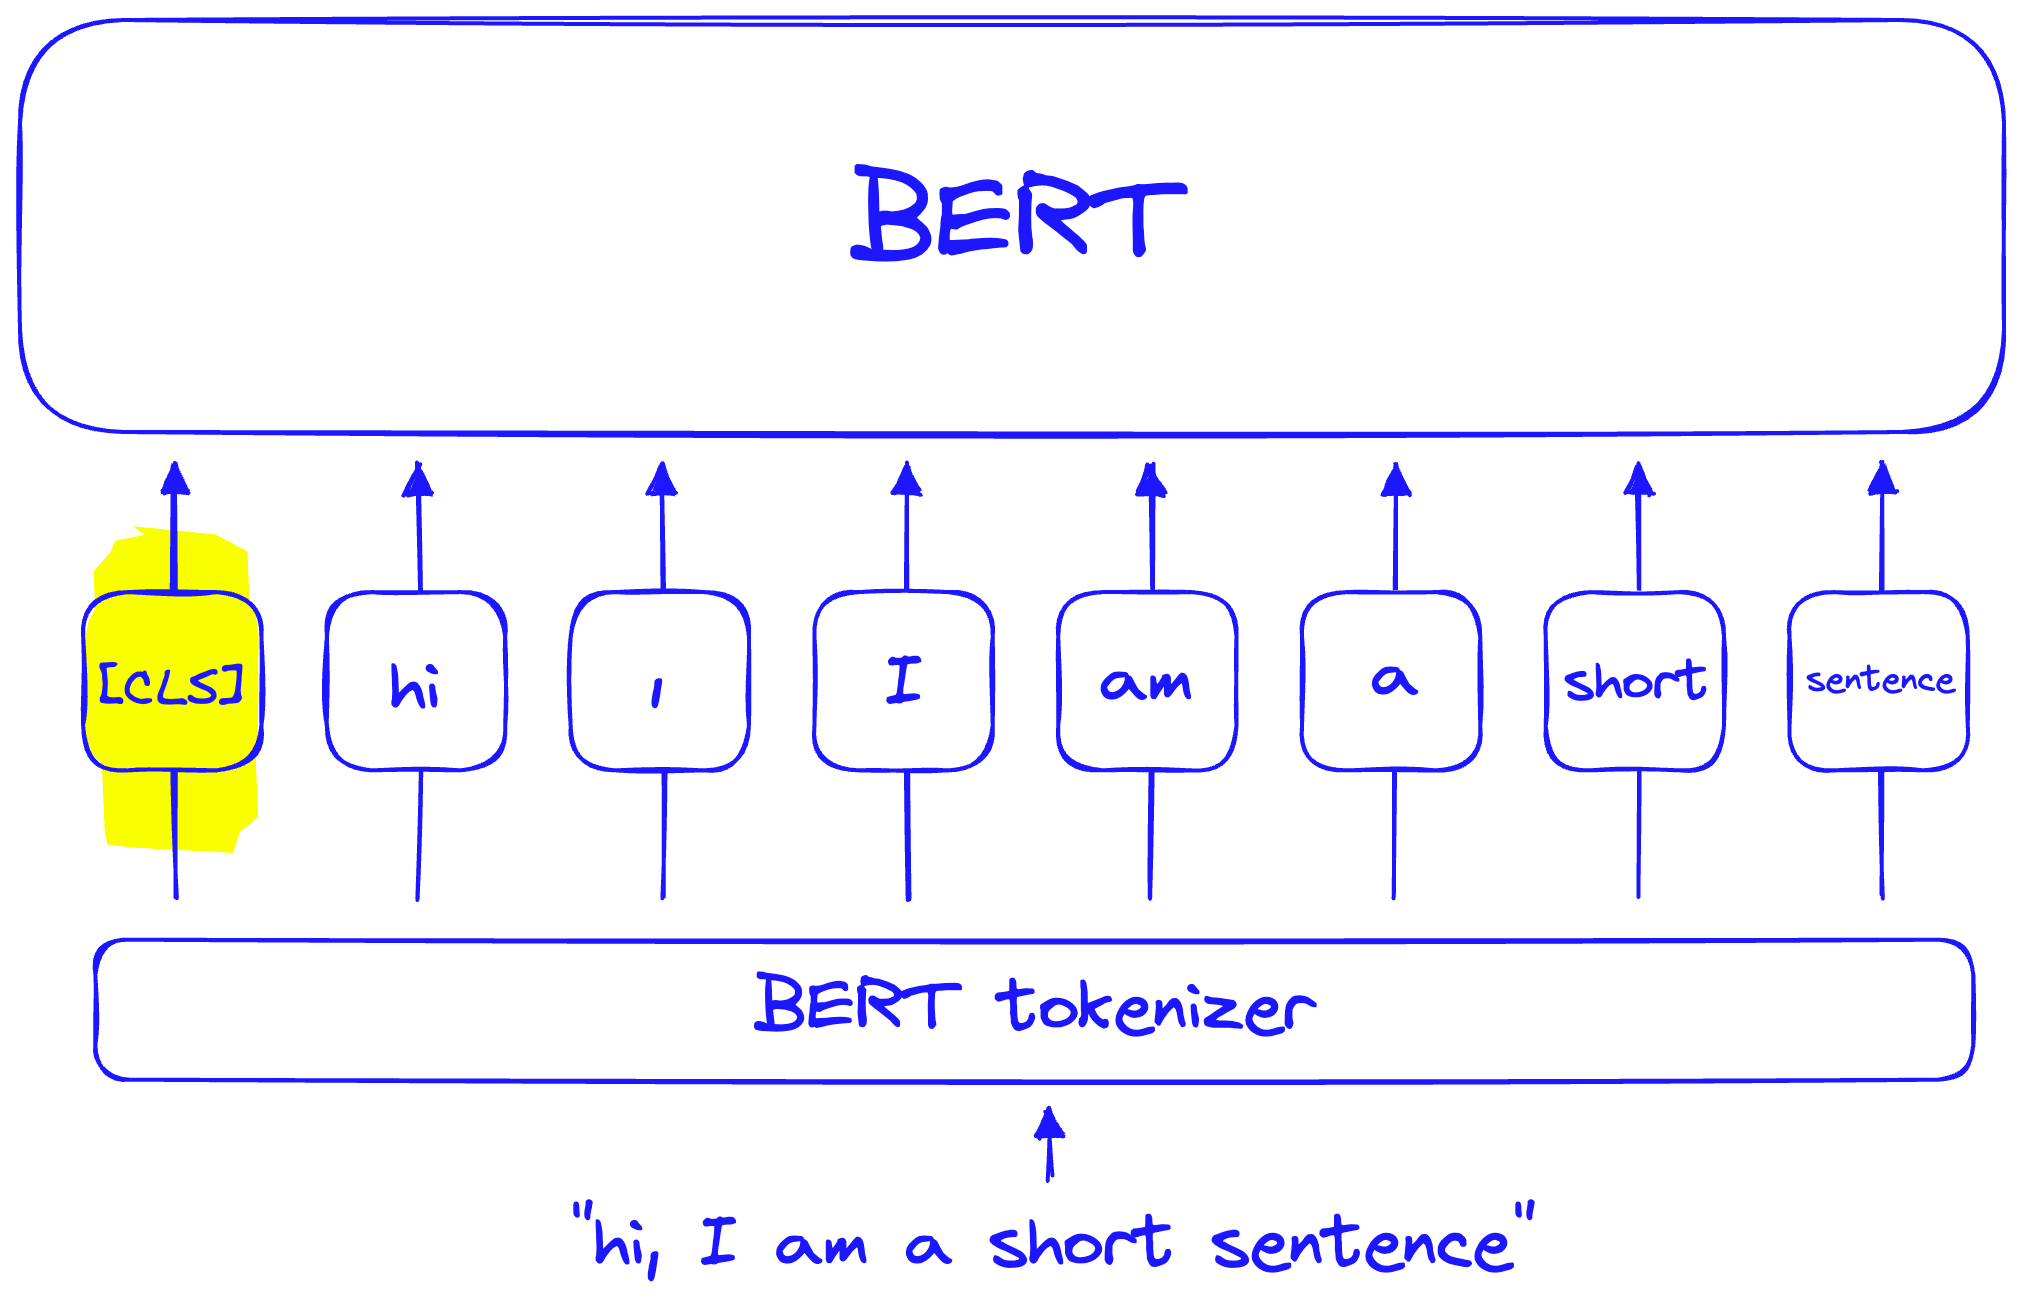 The BERT [CLS] token is preappended to every sequence.